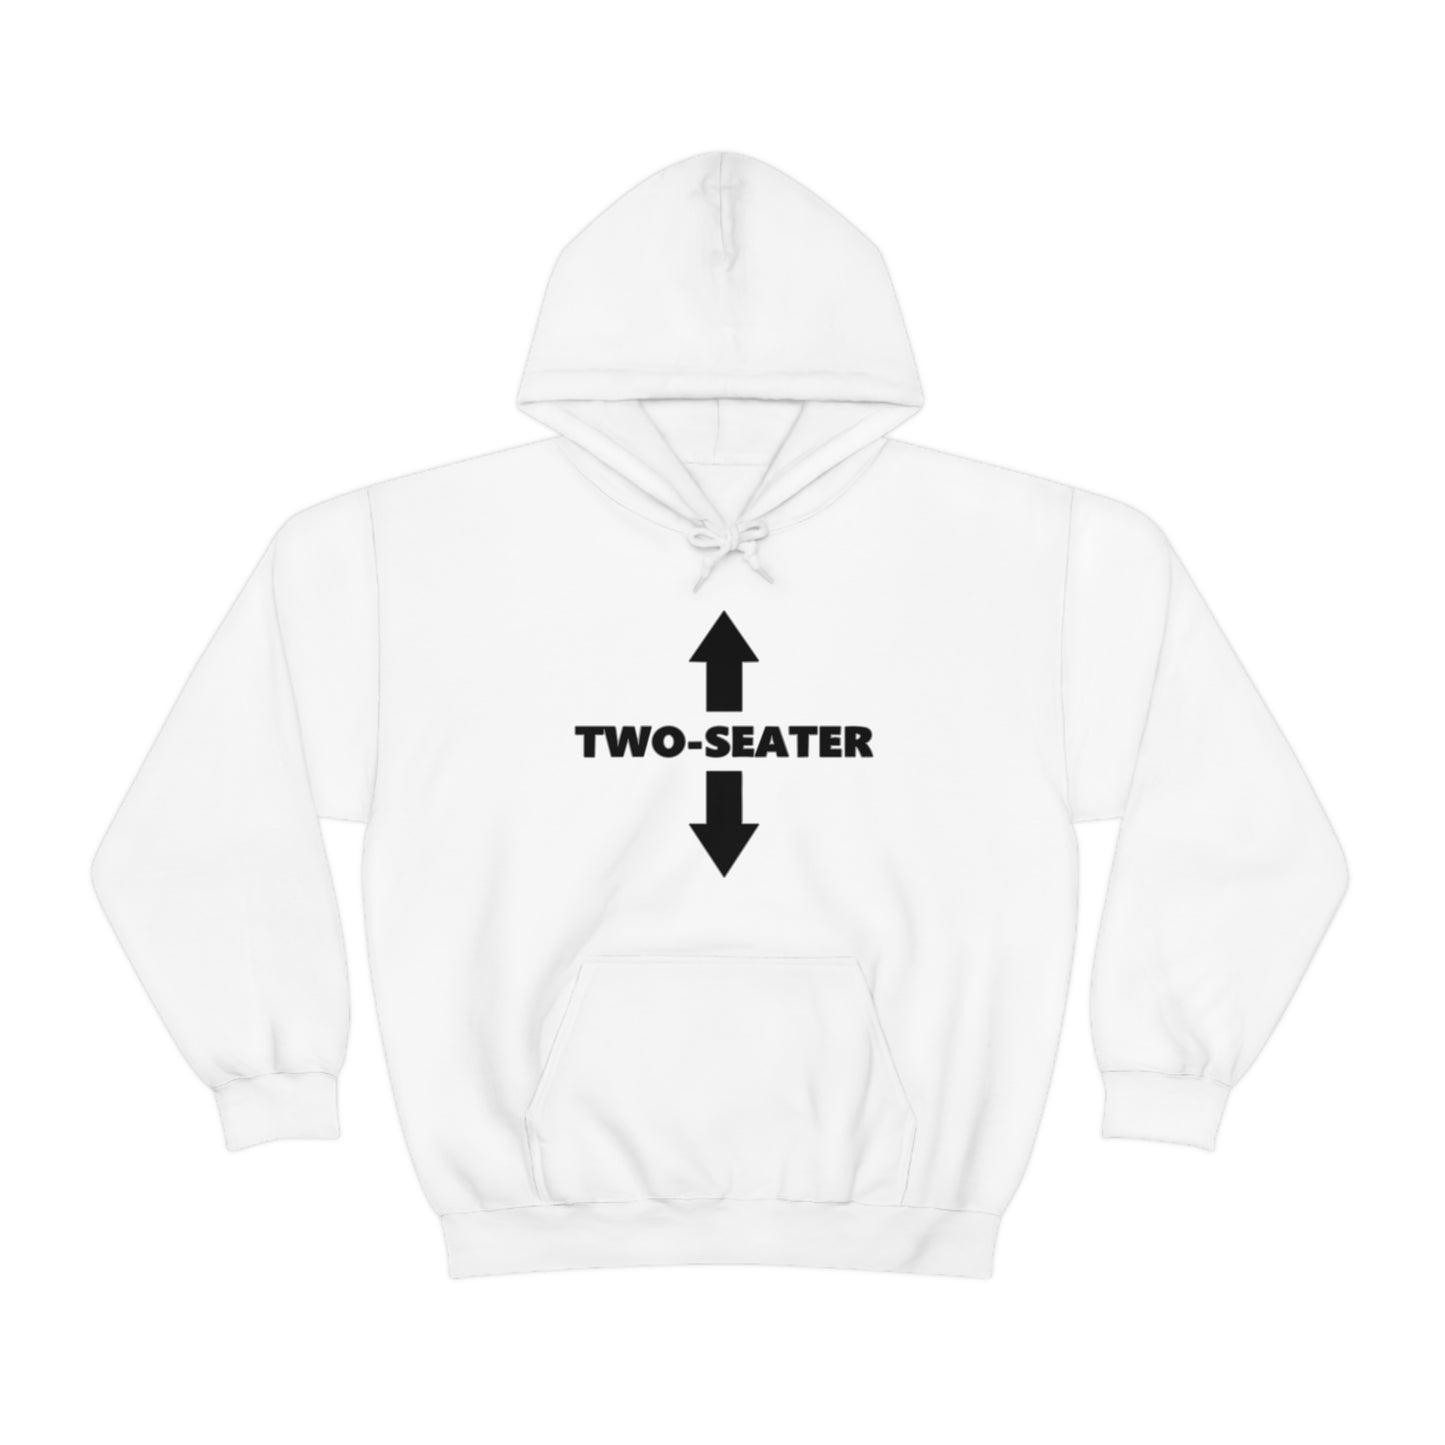 "Two-Seater" Hoodie